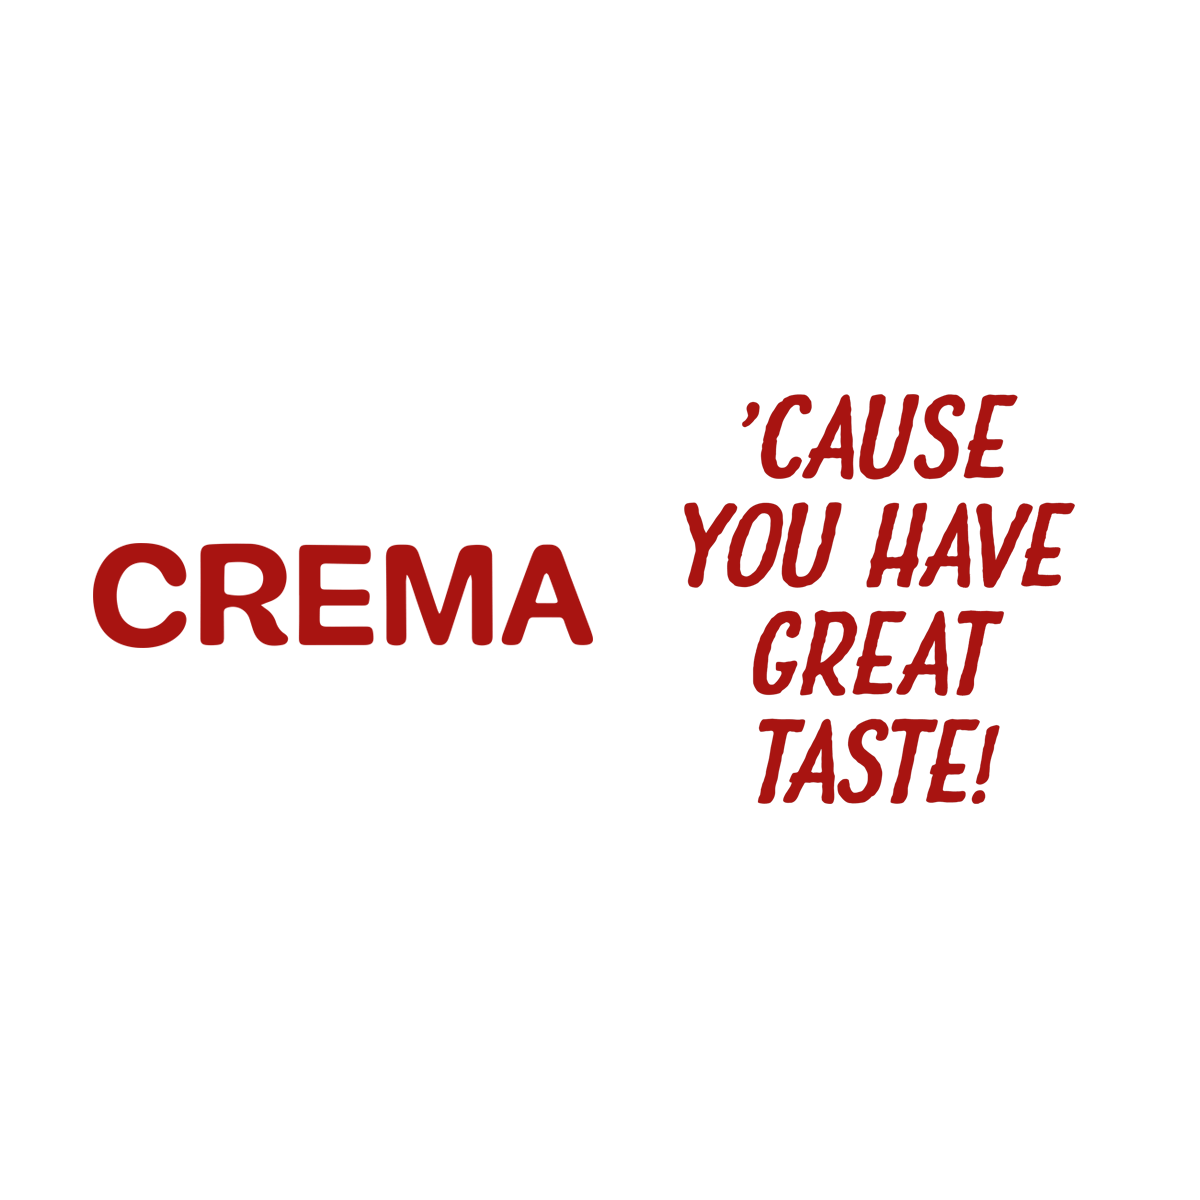 The Crema Coffee Days are here!